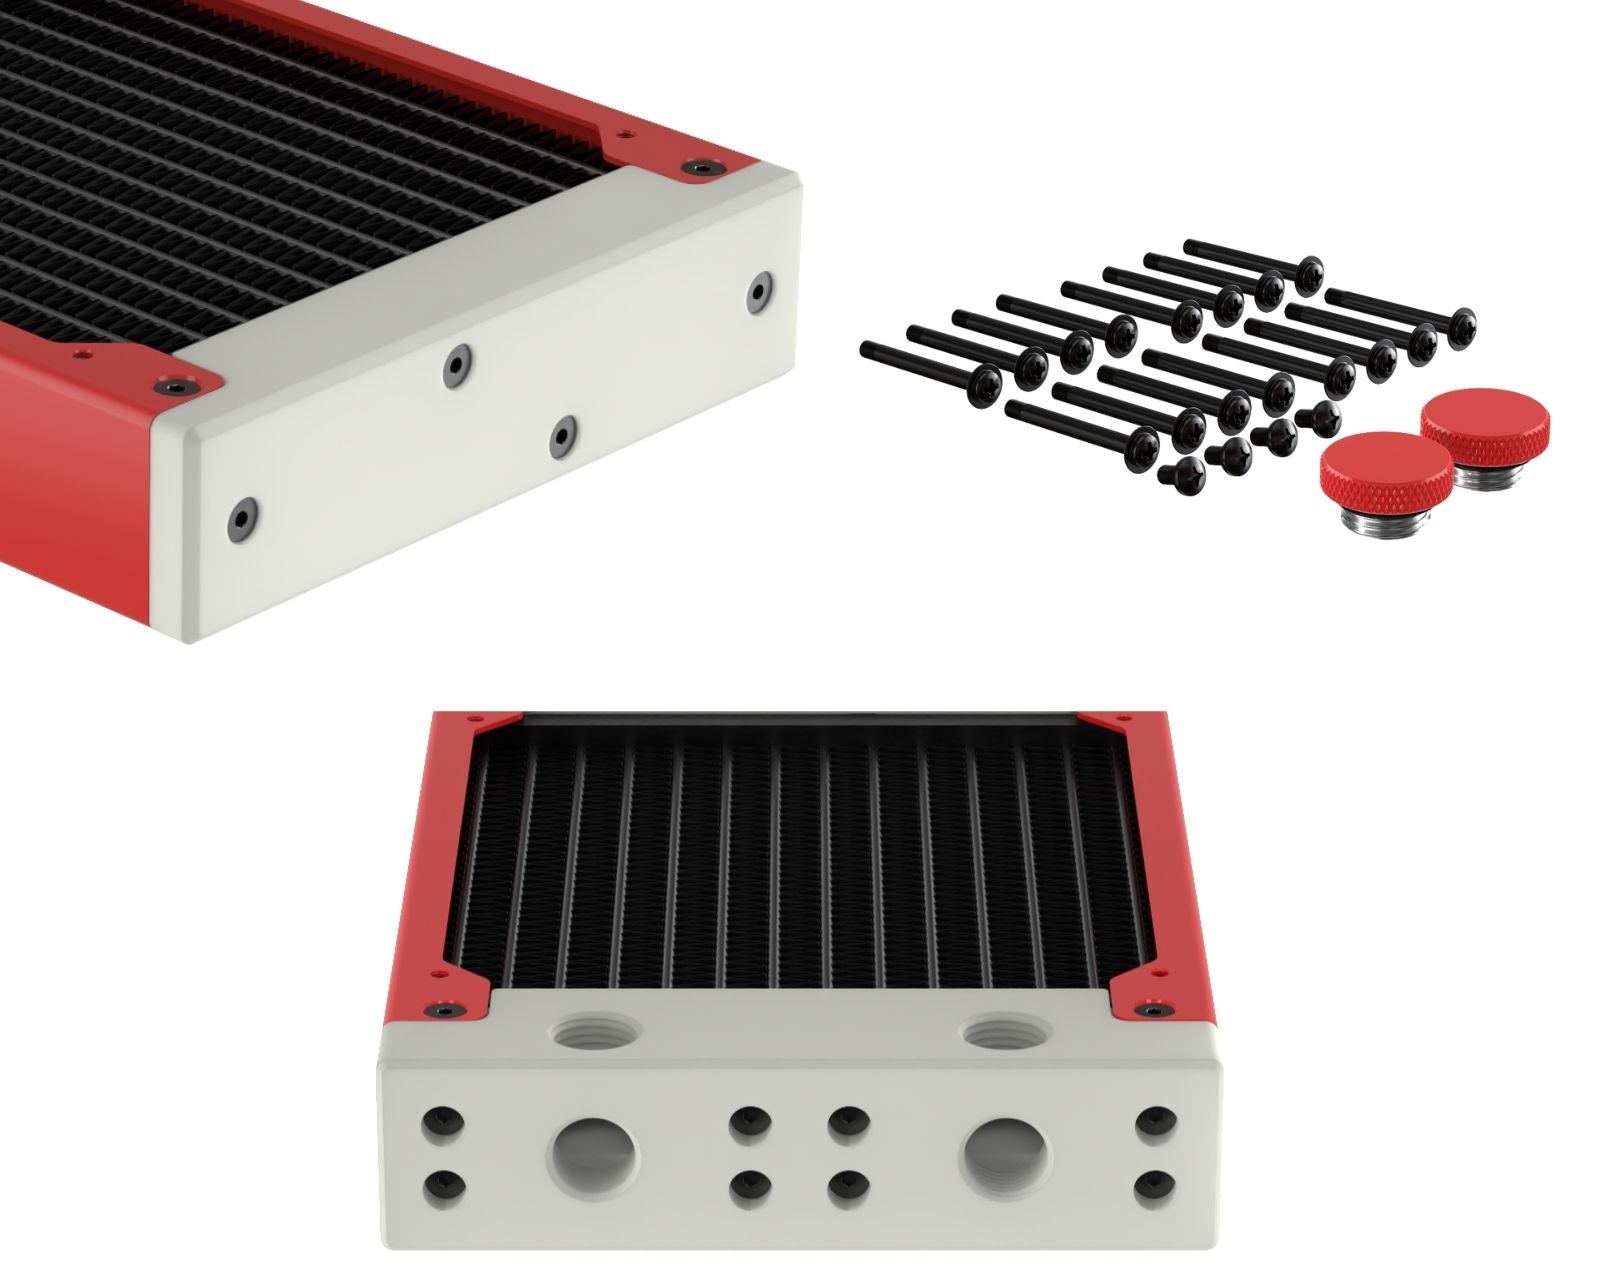 PrimoChill 480SL (30mm) EXIMO Modular Radiator, White POM, 4x120mm, Quad Fan (R-SL-W48) Available in 20+ Colors, Assembled in USA and Custom Watercooling Loop Ready - Razor Red